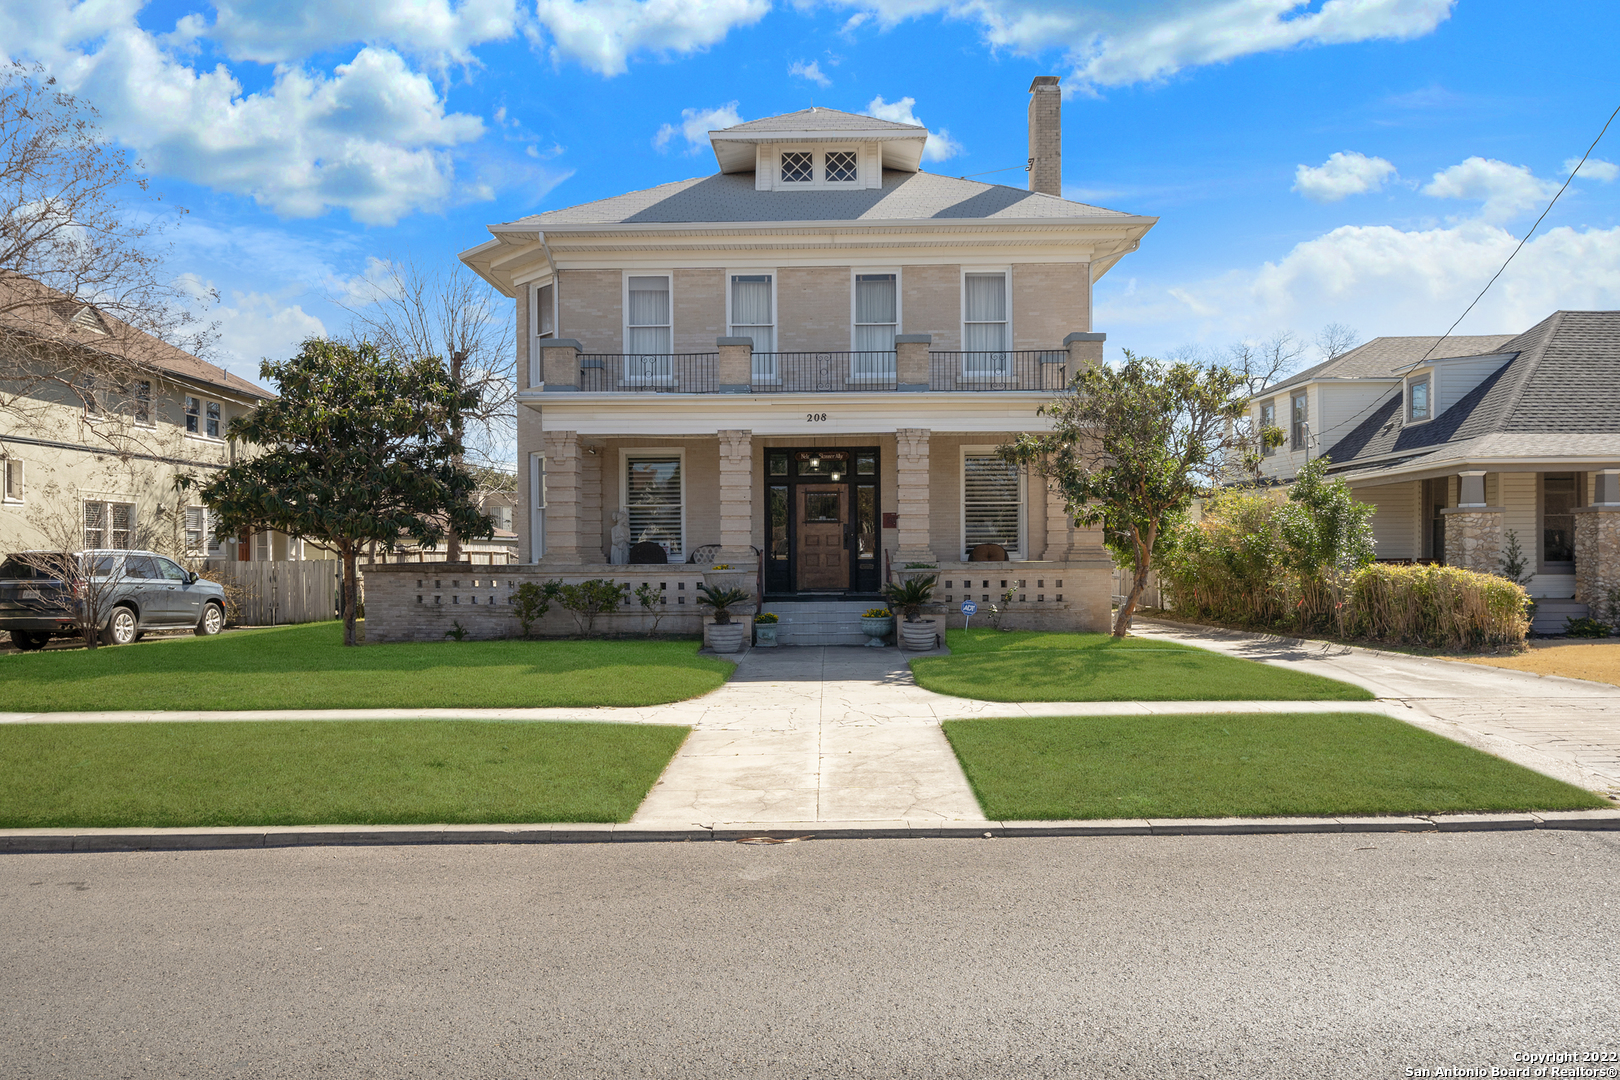 BOM-Buyer accepted a new job out of state 2 days before closing. Their Loss, Your Gain! Opportunity of a lifetime to own this Amazing Home in Historic Monte Vista. MUST SEE! Step back in time with this iconic, 3,204sf classic, built in 1917. Enter the Great Room and marvel at the beauty of the 11' beamed ceilings w/four matching ceiling fans/lights and beautiful crown molding. Keep warm while relaxing by the wood burning fireplace. Carved moldings above the fireplace are flanked by two stained glass windows, and bookcases built-in on each side. Gorgeous hardwood floors in many rooms throughout. Take note of the original doors, hardware, and magnificent archway's woodwork that showcases the stairway. Grand pocket doors w/transoms and amazing stained glass inserts lead to the Dining Room, also with 11' beamed ceilings and 5' tall wainscoting. Enter the Study/Ofc through the French doors with an alternate exit through the back stairwell entrance/exit. The Butlers Pantry w/great built ins between the dining room and the kitchen is an added delight with great storage too. The kitchen has 42" walnut cabinetry, tile countertops and backsplash. Stainless steel appliances throughout including a new, gas smart stove with air fryer. The Breakfast Nook has a nostalgic built in bench with table. The kitchen leads to back stairwell room, great for storage or garden room w/a .25 bathroom (toilet only) and exits to the back yard. The Cloak Room is adjacent to the Great Room w/built in telephone desk that leads to the outside Carriage Landing through a side door and down to the basement through another door. The basement (Perfect for a wine cellar) has plenty of storage capacity, good lighting, and has been finished w/masonry walls and a sealed concrete floor.  All bedrooms are located on the second floor landing, accessed by the classic staircase w/curved wooden handrails. The crystal chandelier is a showpiece attached to the 10.5' ceiling. Admire the transoms with adorned stained glass inserts on three of the bedroom doors. Each bedroom has crown molding, toe molding, high ceilings, large closets, original hardwood floors, and one bedroom, has its own wood burning fireplace. The master bedroom has a bonus room attached, perfect for a nursery, workout, meditation, or media room. The hallway full bathroom has wood cabinetry, double sinks, tub/shower combo w/tile midway up the walls and on the floors. There is an upstairs back stairwell landing with built in shelf/case for storing seasonal items or supplies. This leads to an additional 4th bedroom, (live-in quarters, crafts, utility room, etc.) with a large closet that currently houses the extra large washer and dryer.  What remains is the Covered Front Porch & Side Sun Patio, Upstairs Balcony to "unplug" watching the sun rise and sun set. The Carriage House (detached garage), is a brick building with 2 bays and secured with vintage doors. There is a full bath (restoration needed) in the back of one of the bays. The Storage House (another detached garage), is a wood siding building w/composition roof and double doors open to the 15' paved alley (private drive to the back of the property) or one opening from the back yard. The Attic is huge w/access from the hallway closet. In 2018 a 4 ton, 14 seer, with heat pump and ultraviolet light central HVAC system was installed for upstairs cooling needs. A new 25 yr. composition roof with ridge vents was installed in 2016. Gentle upgrades have been made throughout the years, but its original structural beauty and "vintage charm" have been guarded. This is a Historians Dream that could well represent "one" of the best preserved homes of pre-World War I structures in the Monte Vista Historic District. It is literally "Preservation at its finest" and a MUST SEE!!